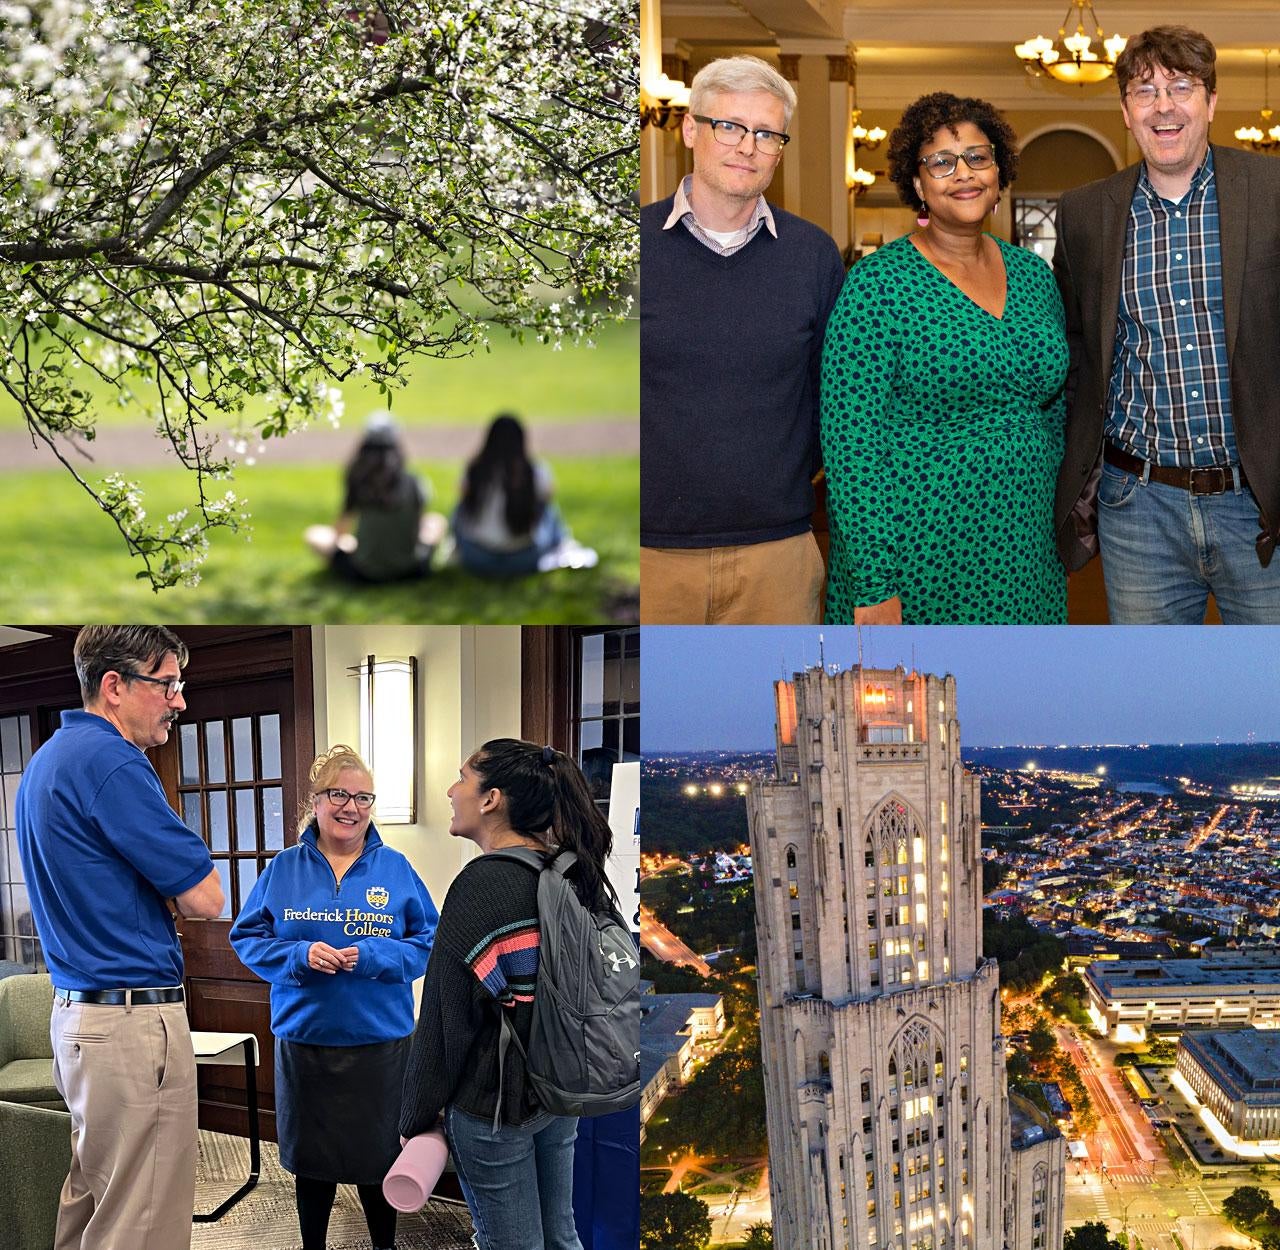 Photo collage highlighting students on campsus; scholar-mentors; Cathedral of Learning; and people attending and informational event.